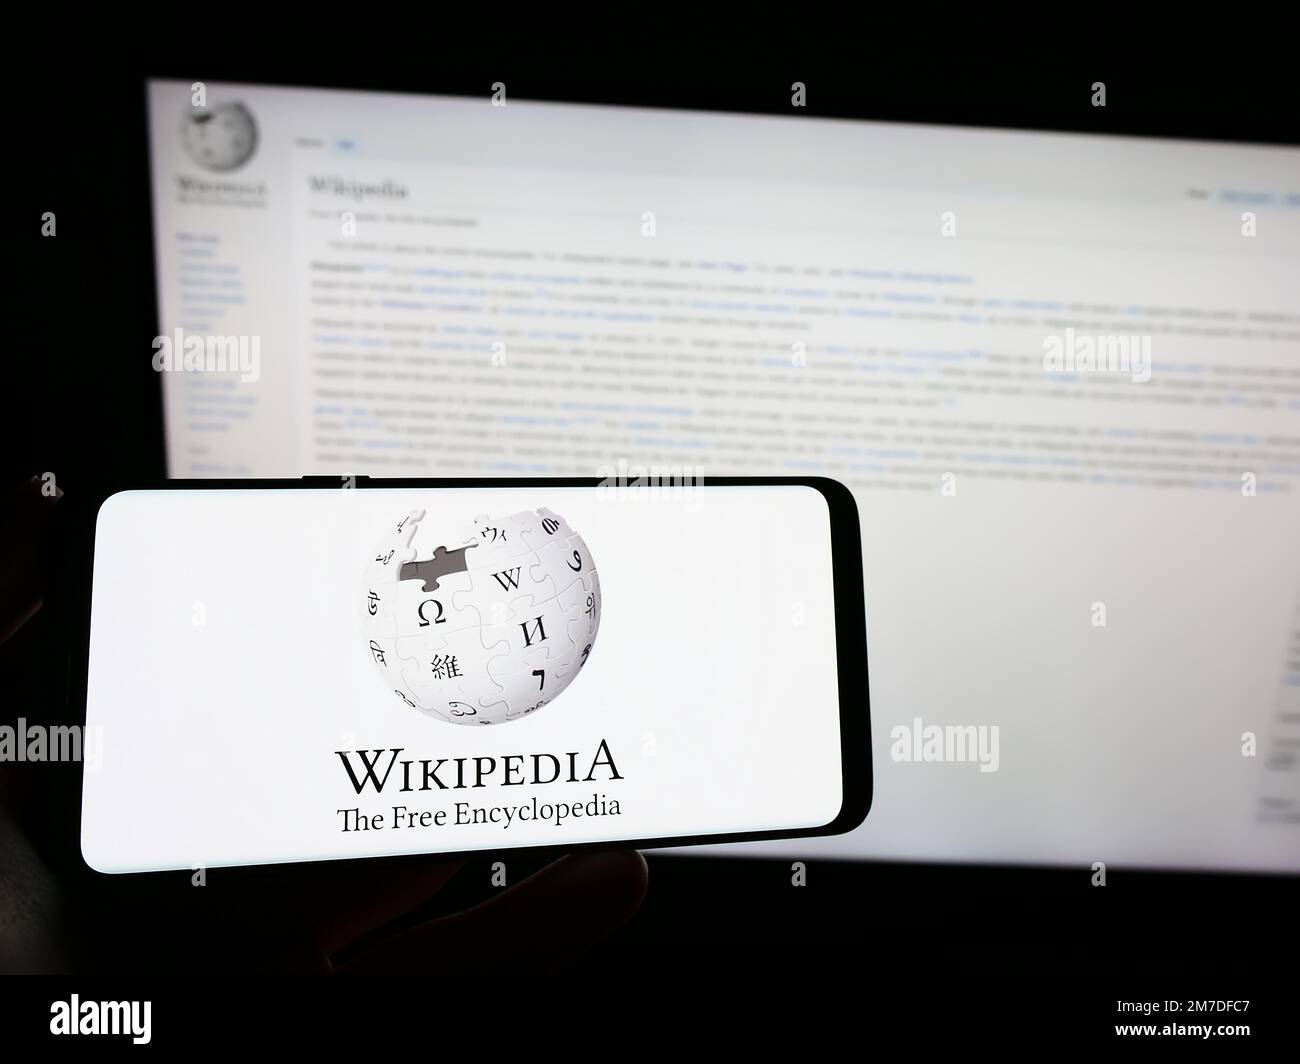 Person holding smartphone with logo of online encyclopedia Wikipedia on screen in front of website. Focus on phone display. Stock Photo